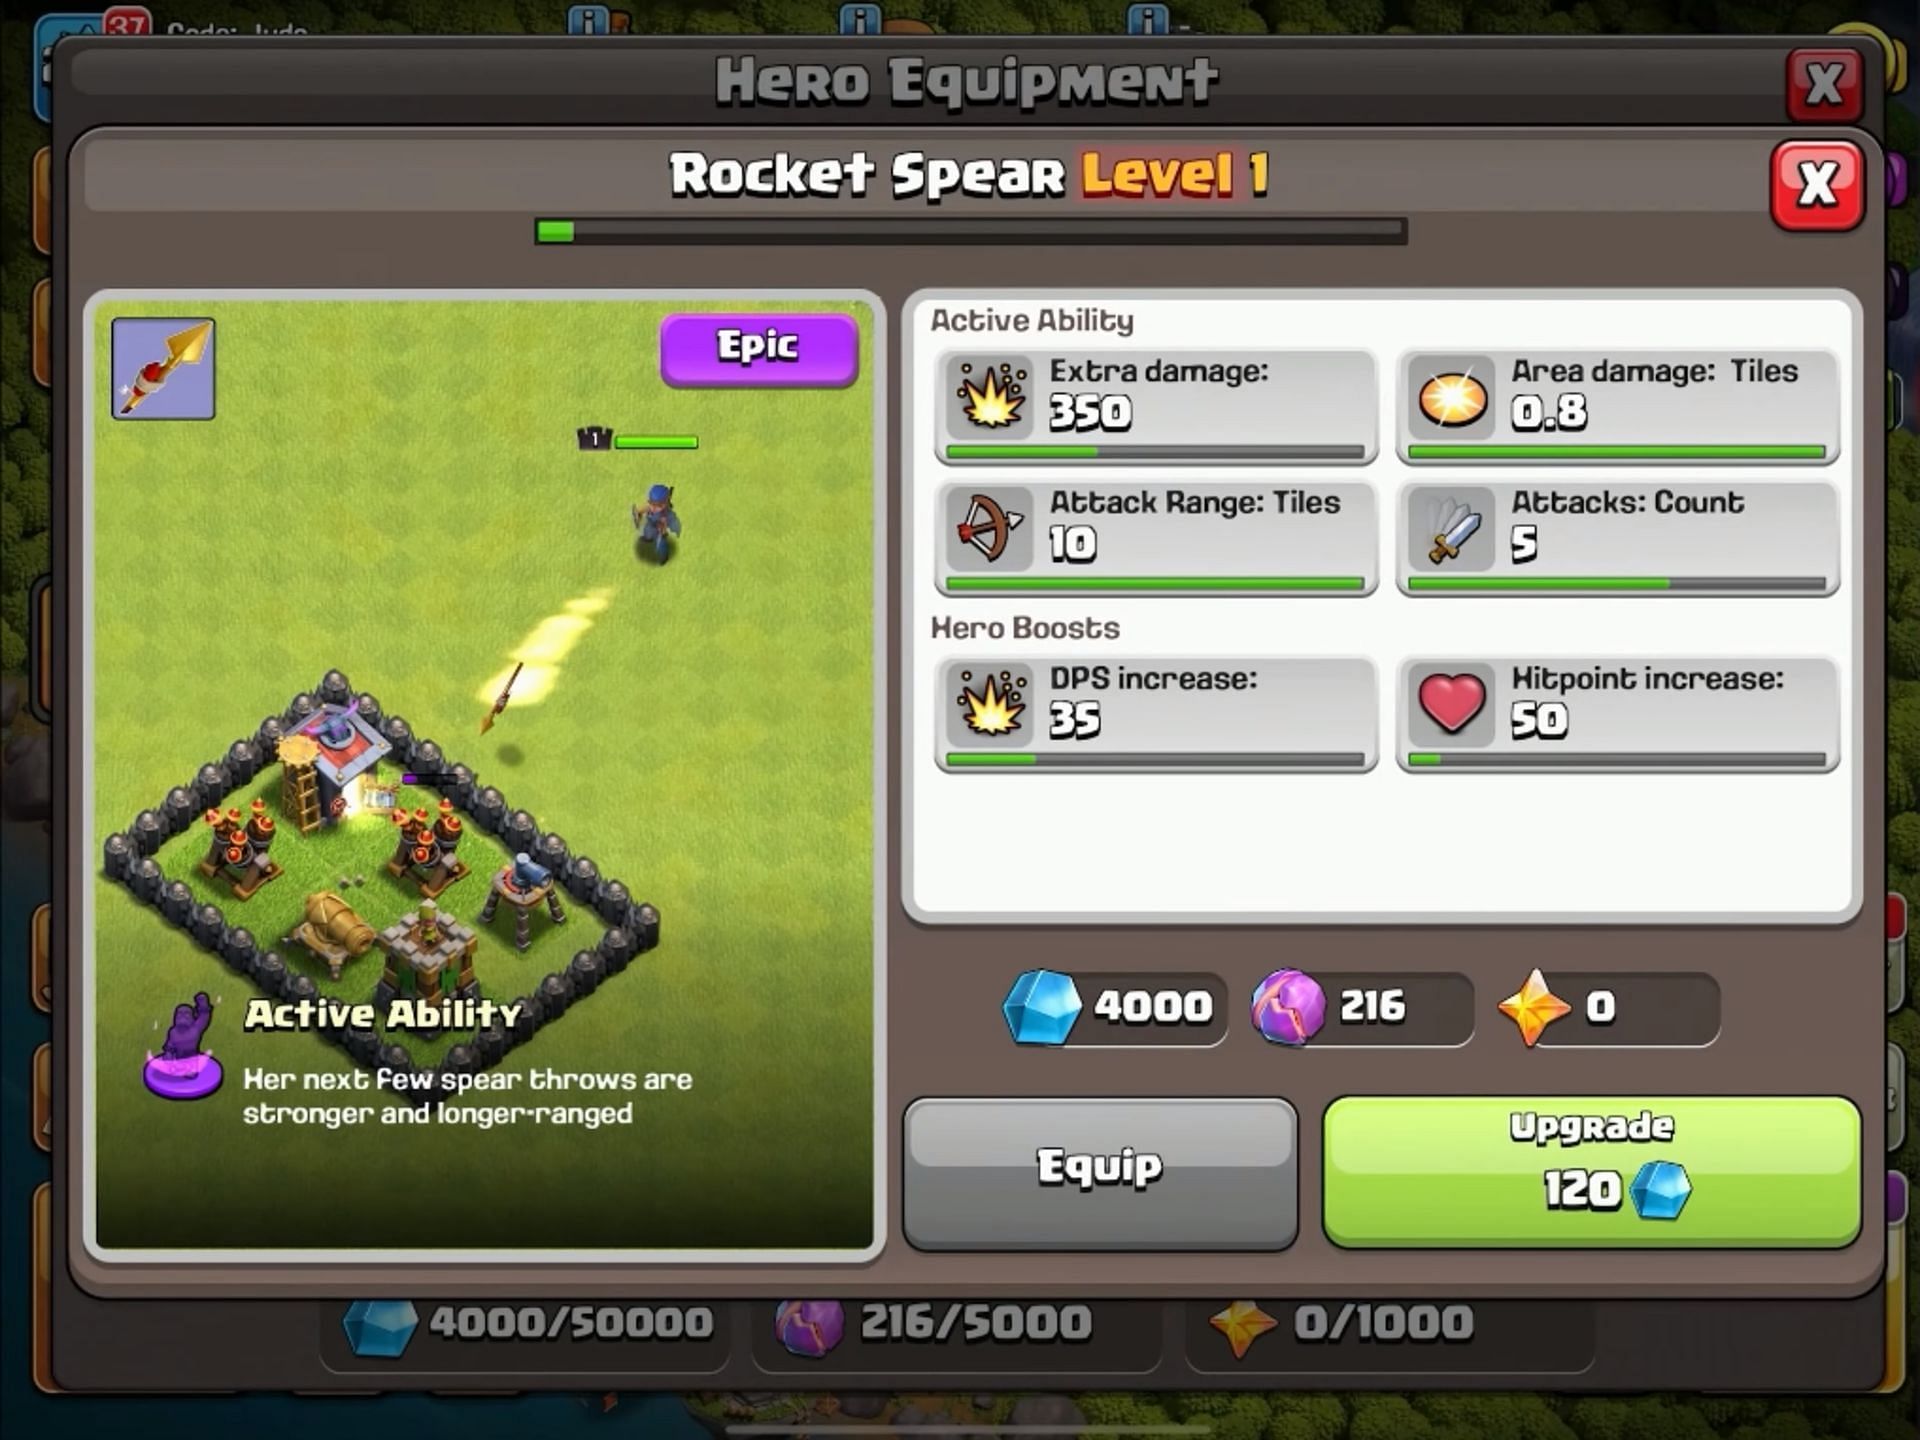 Rocket Spear level 1 stats (Image via Supercell || Judo Sloth Gaming/YouTube)